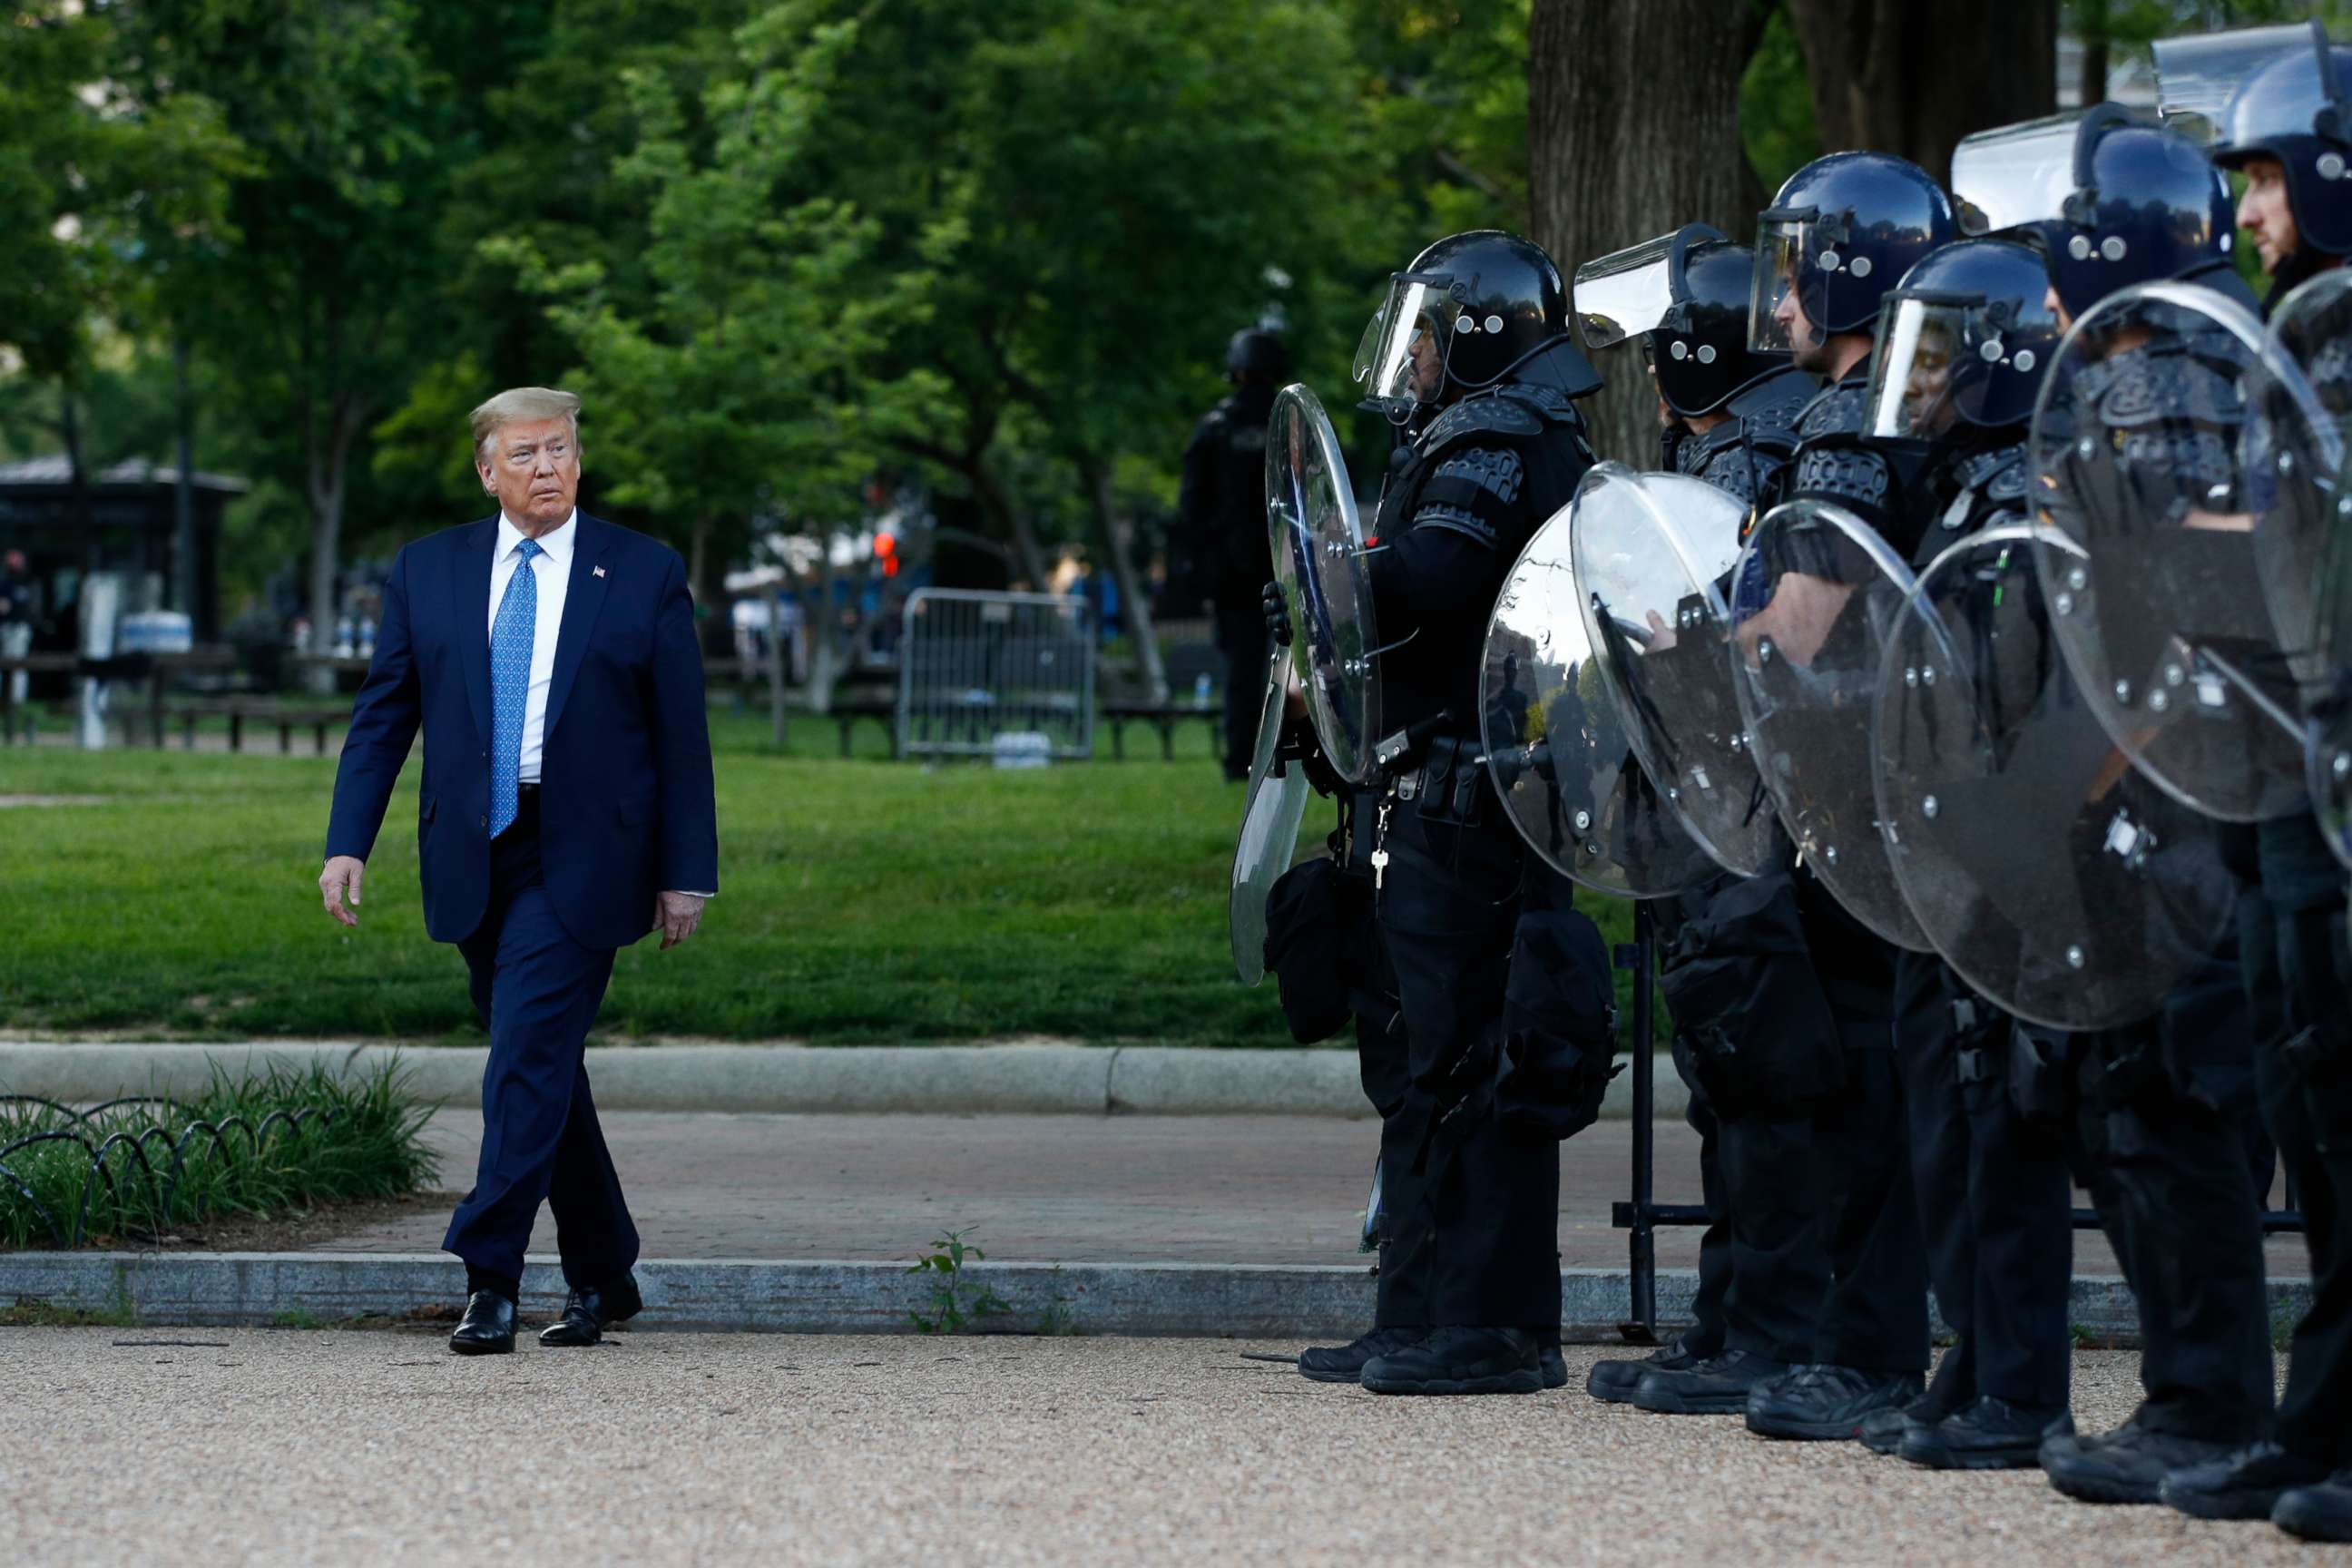 PHOTO: In this Monday, June 1, 2020, file photo President Donald Trump walks past police in Lafayette Park after visiting outside St. John's Church across from the White House in Washington.